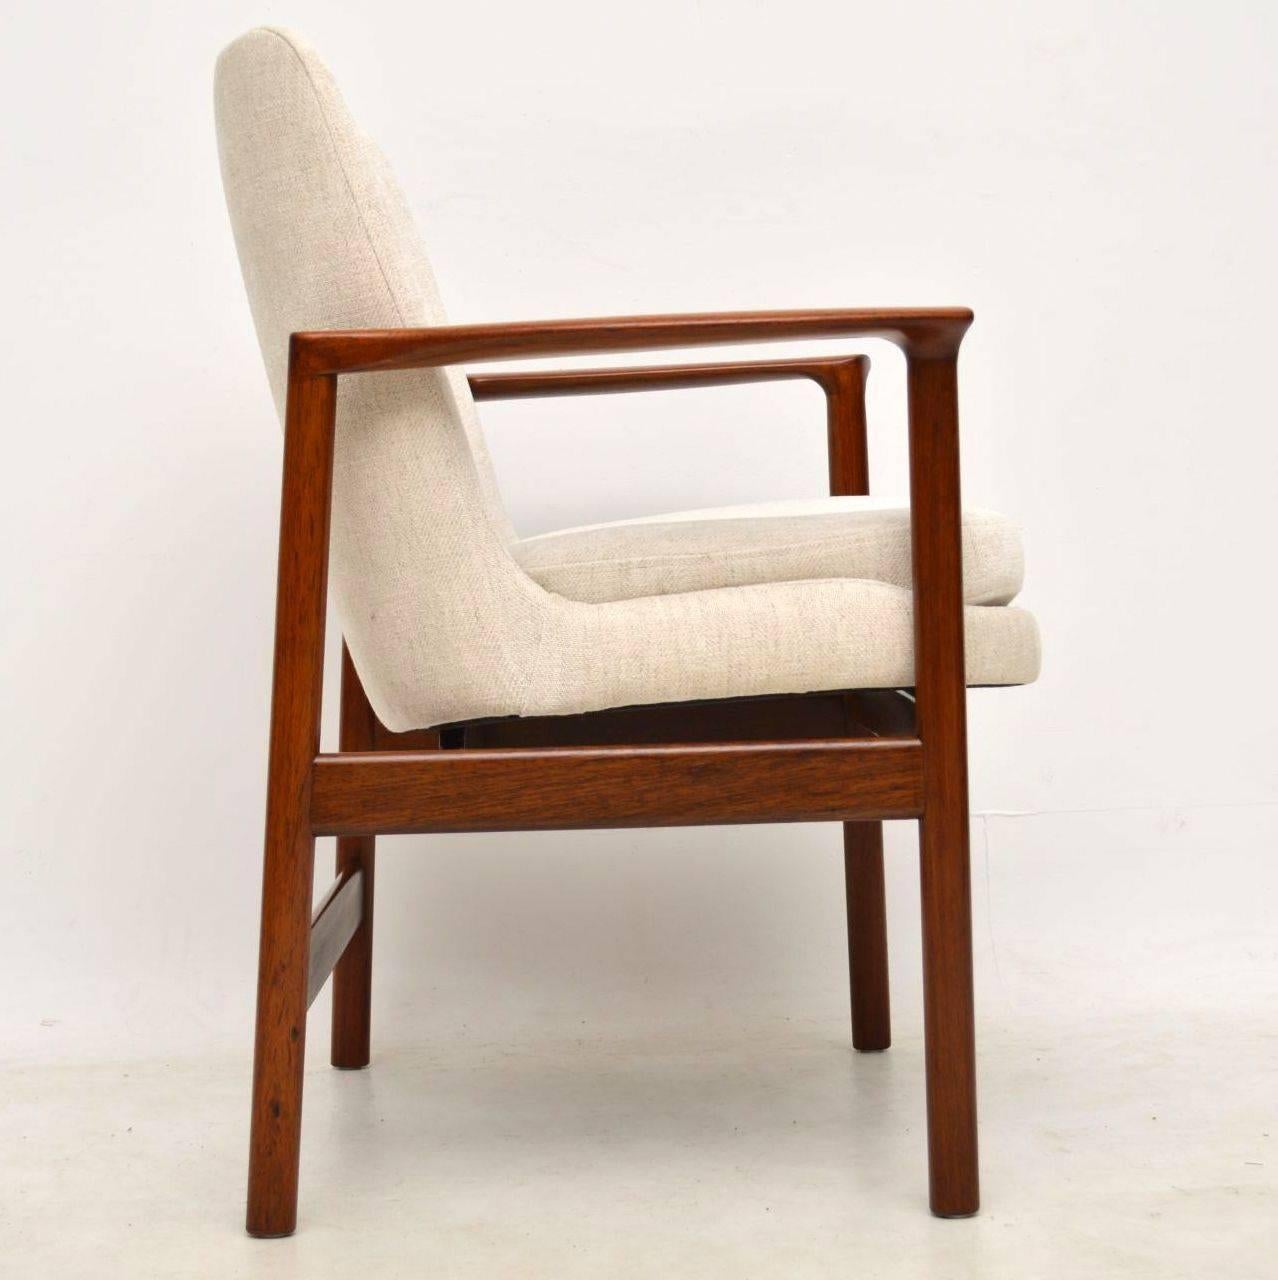 A stunning vintage Danish armchair, this dates from the 1960s. We have had the frame stripped and re-polished to a very high standard, it has a beautiful color tone. We’ve had the seat newly re-upholstered in our off white fabric, the condition of